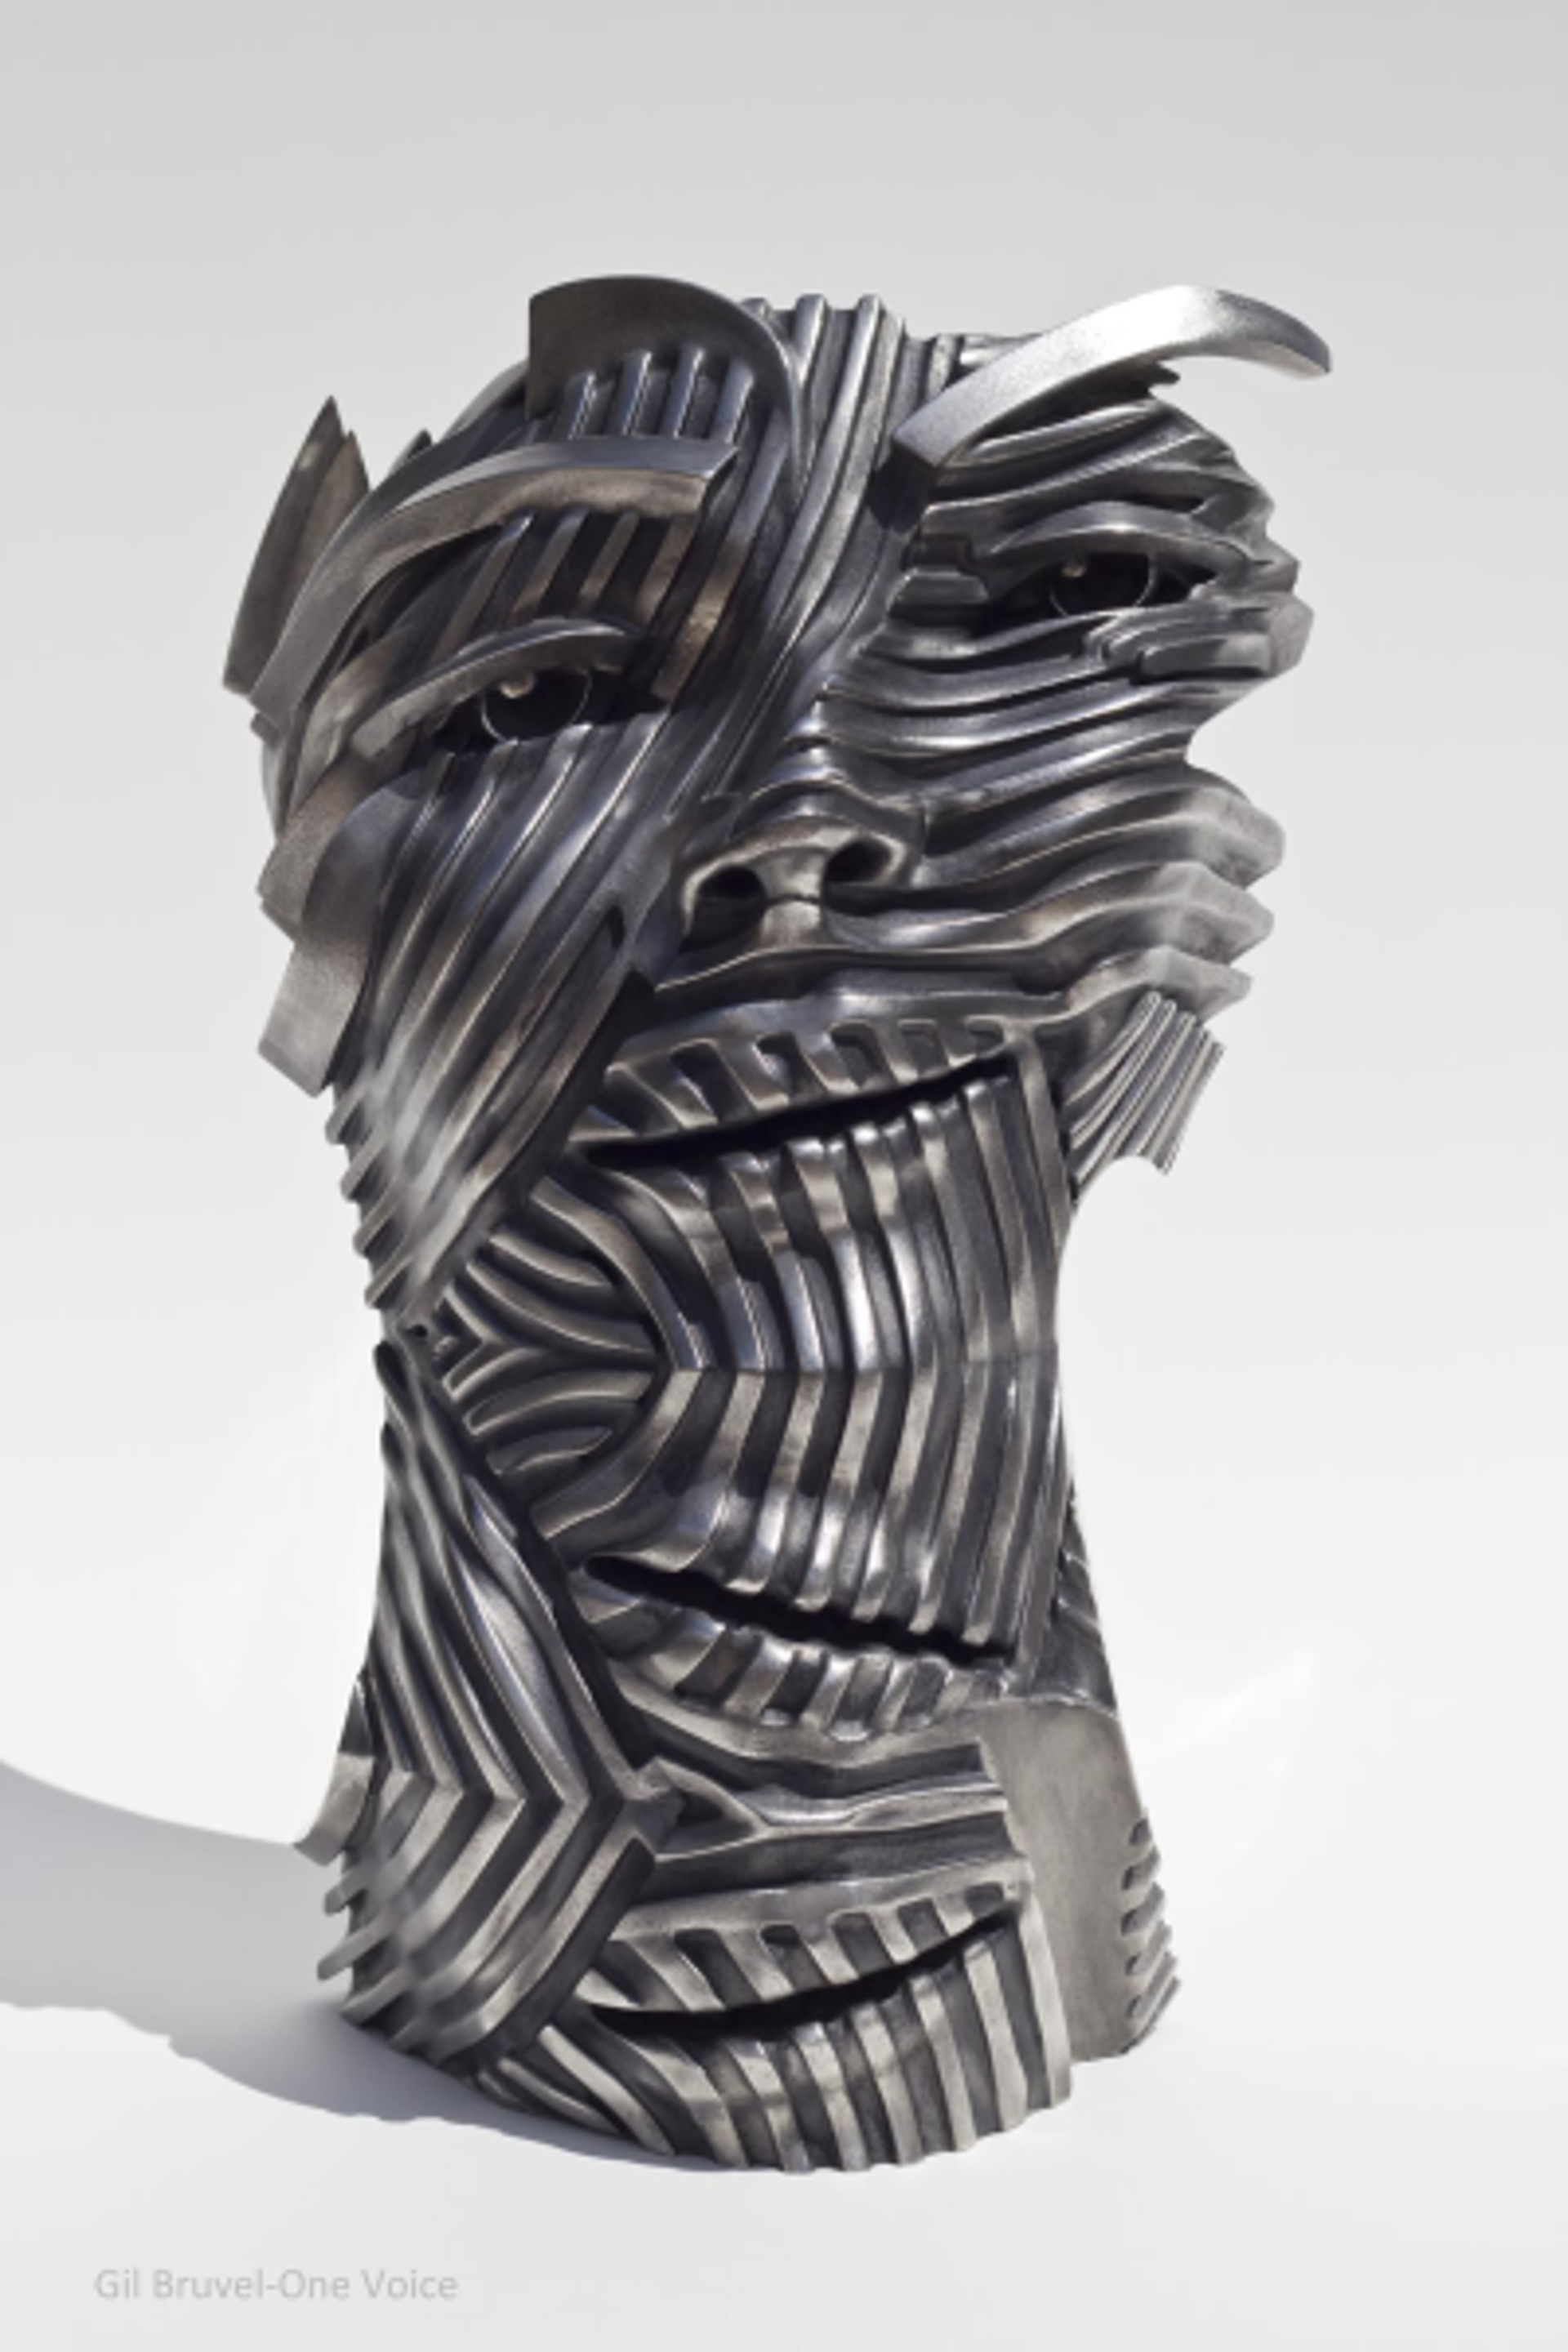 One Voice by Gil Bruvel